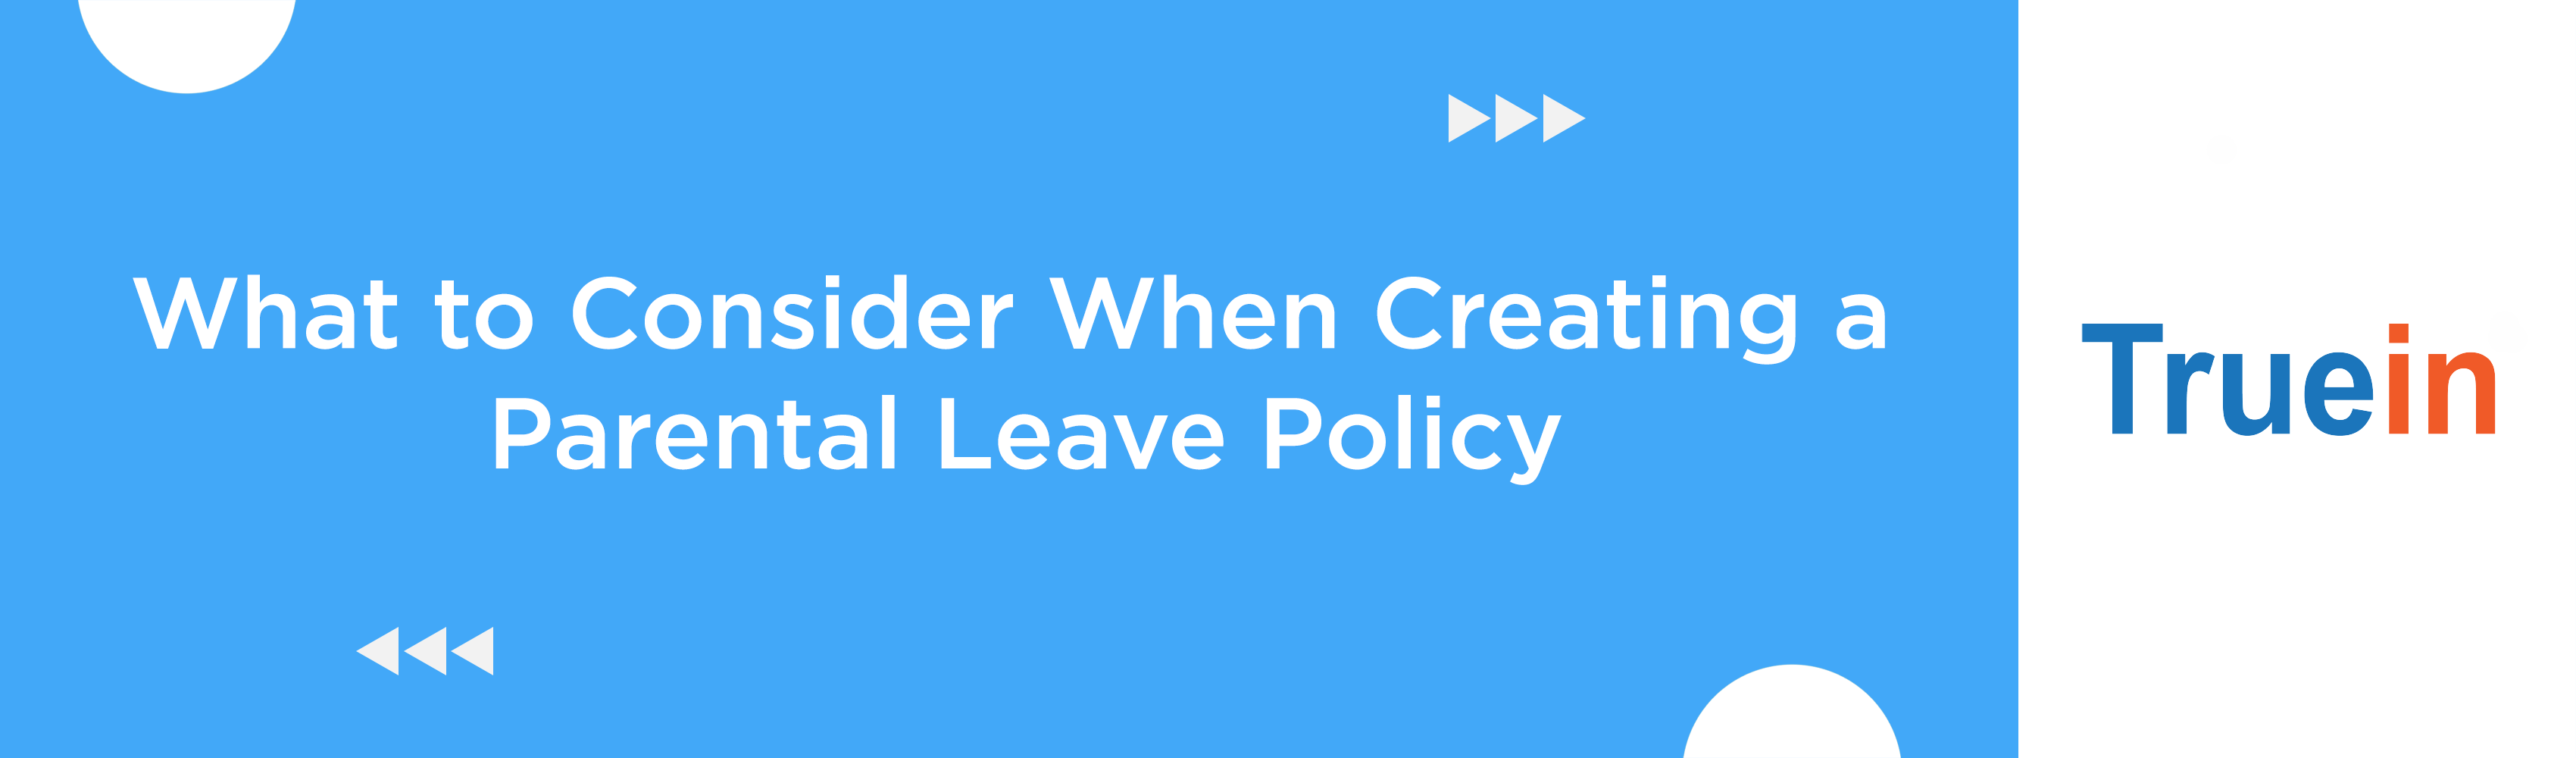 What to Consider When Creating a Parental Leave Policy